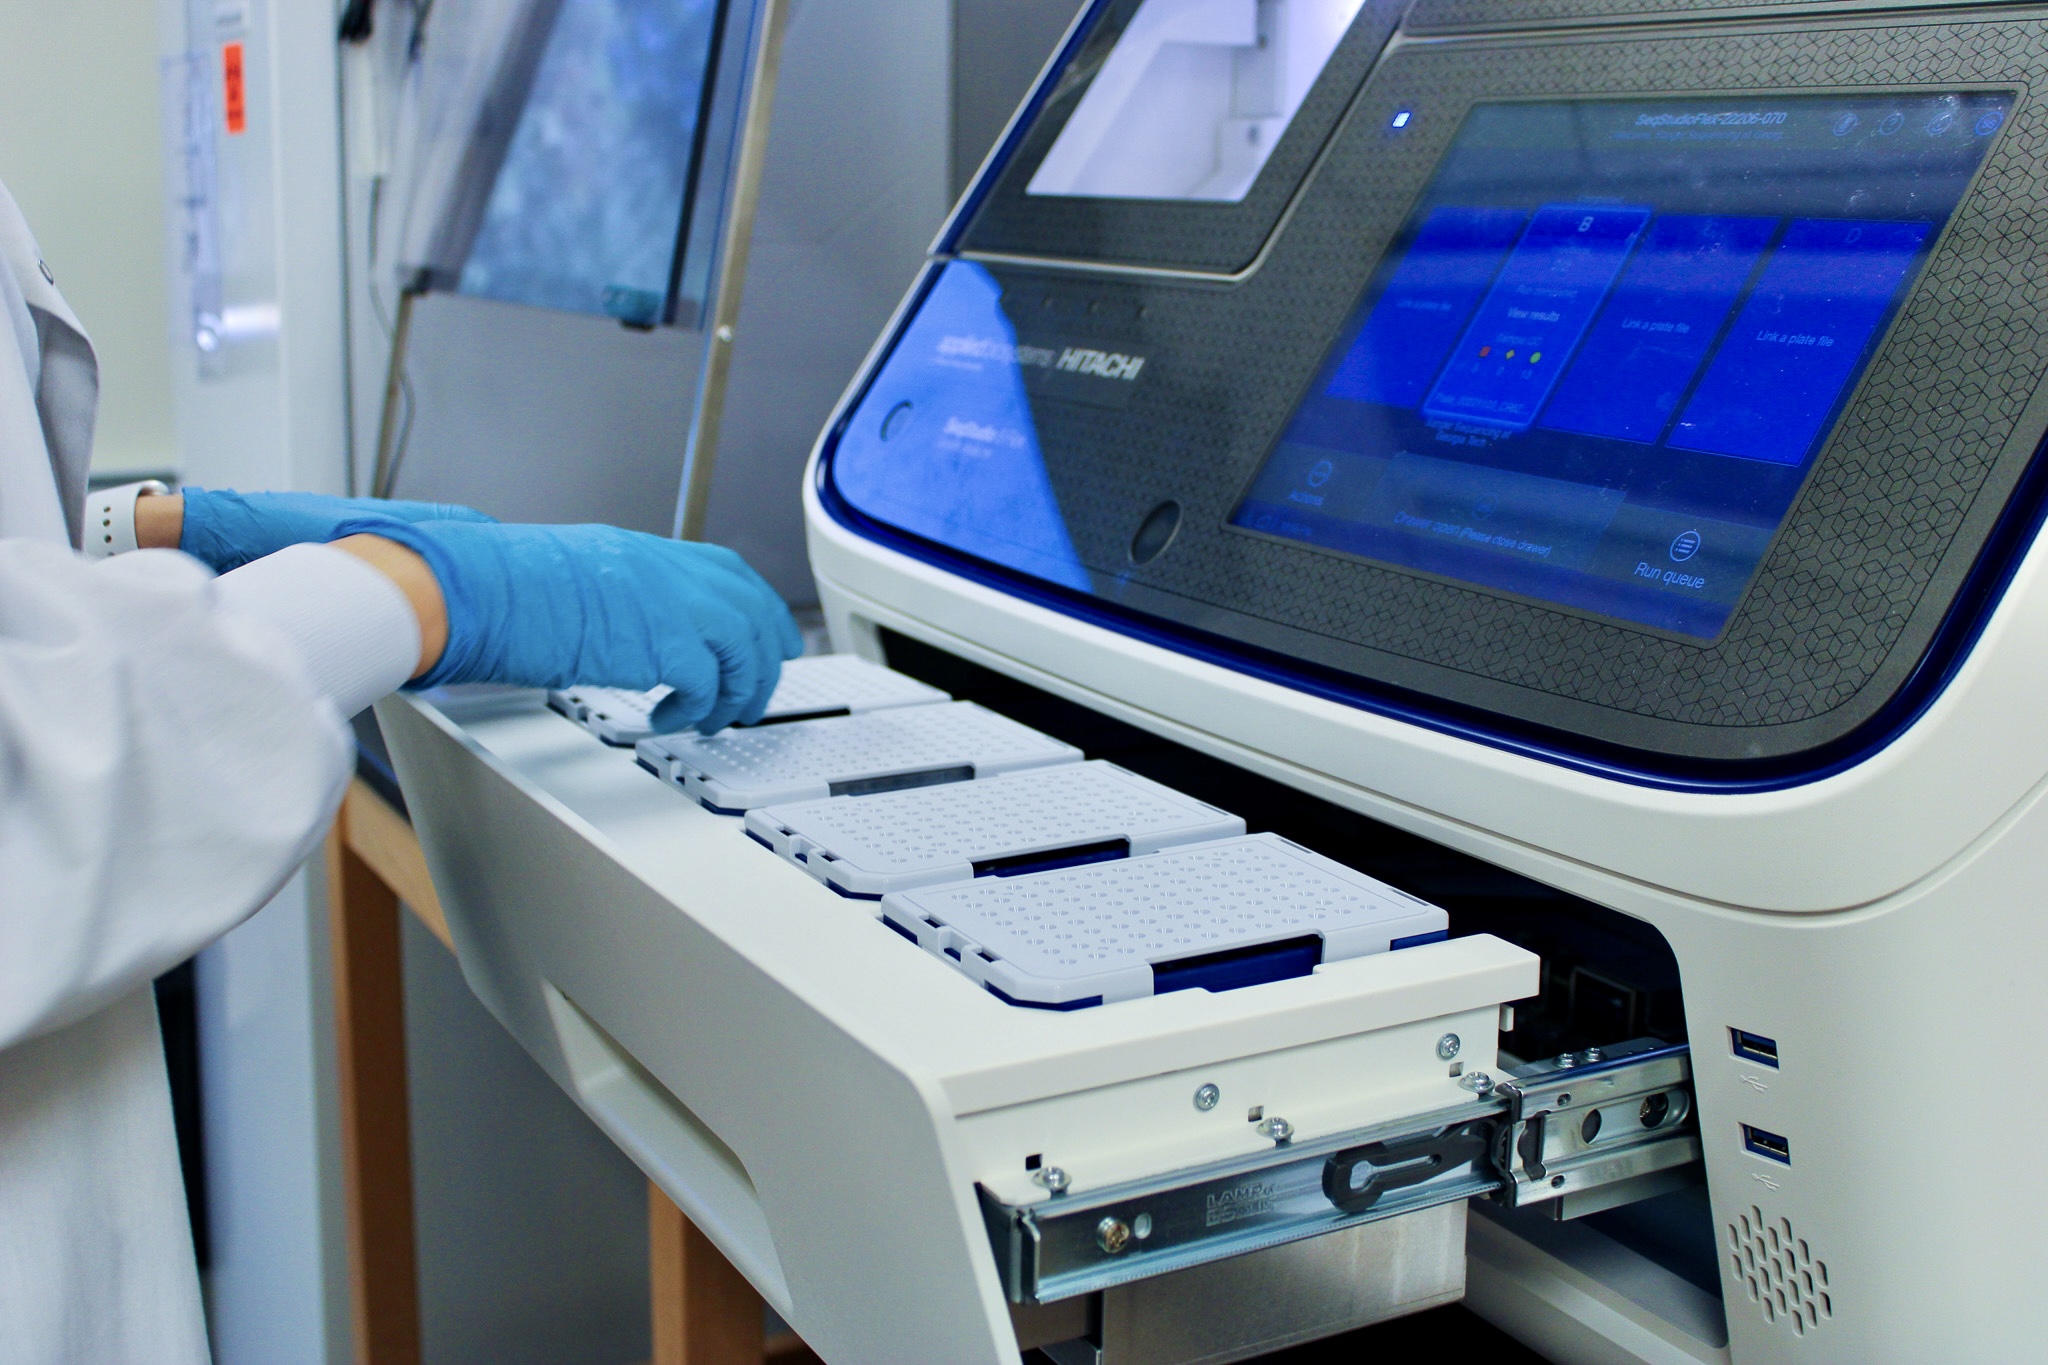 DNA samples are loaded into the Sanger processing machine.